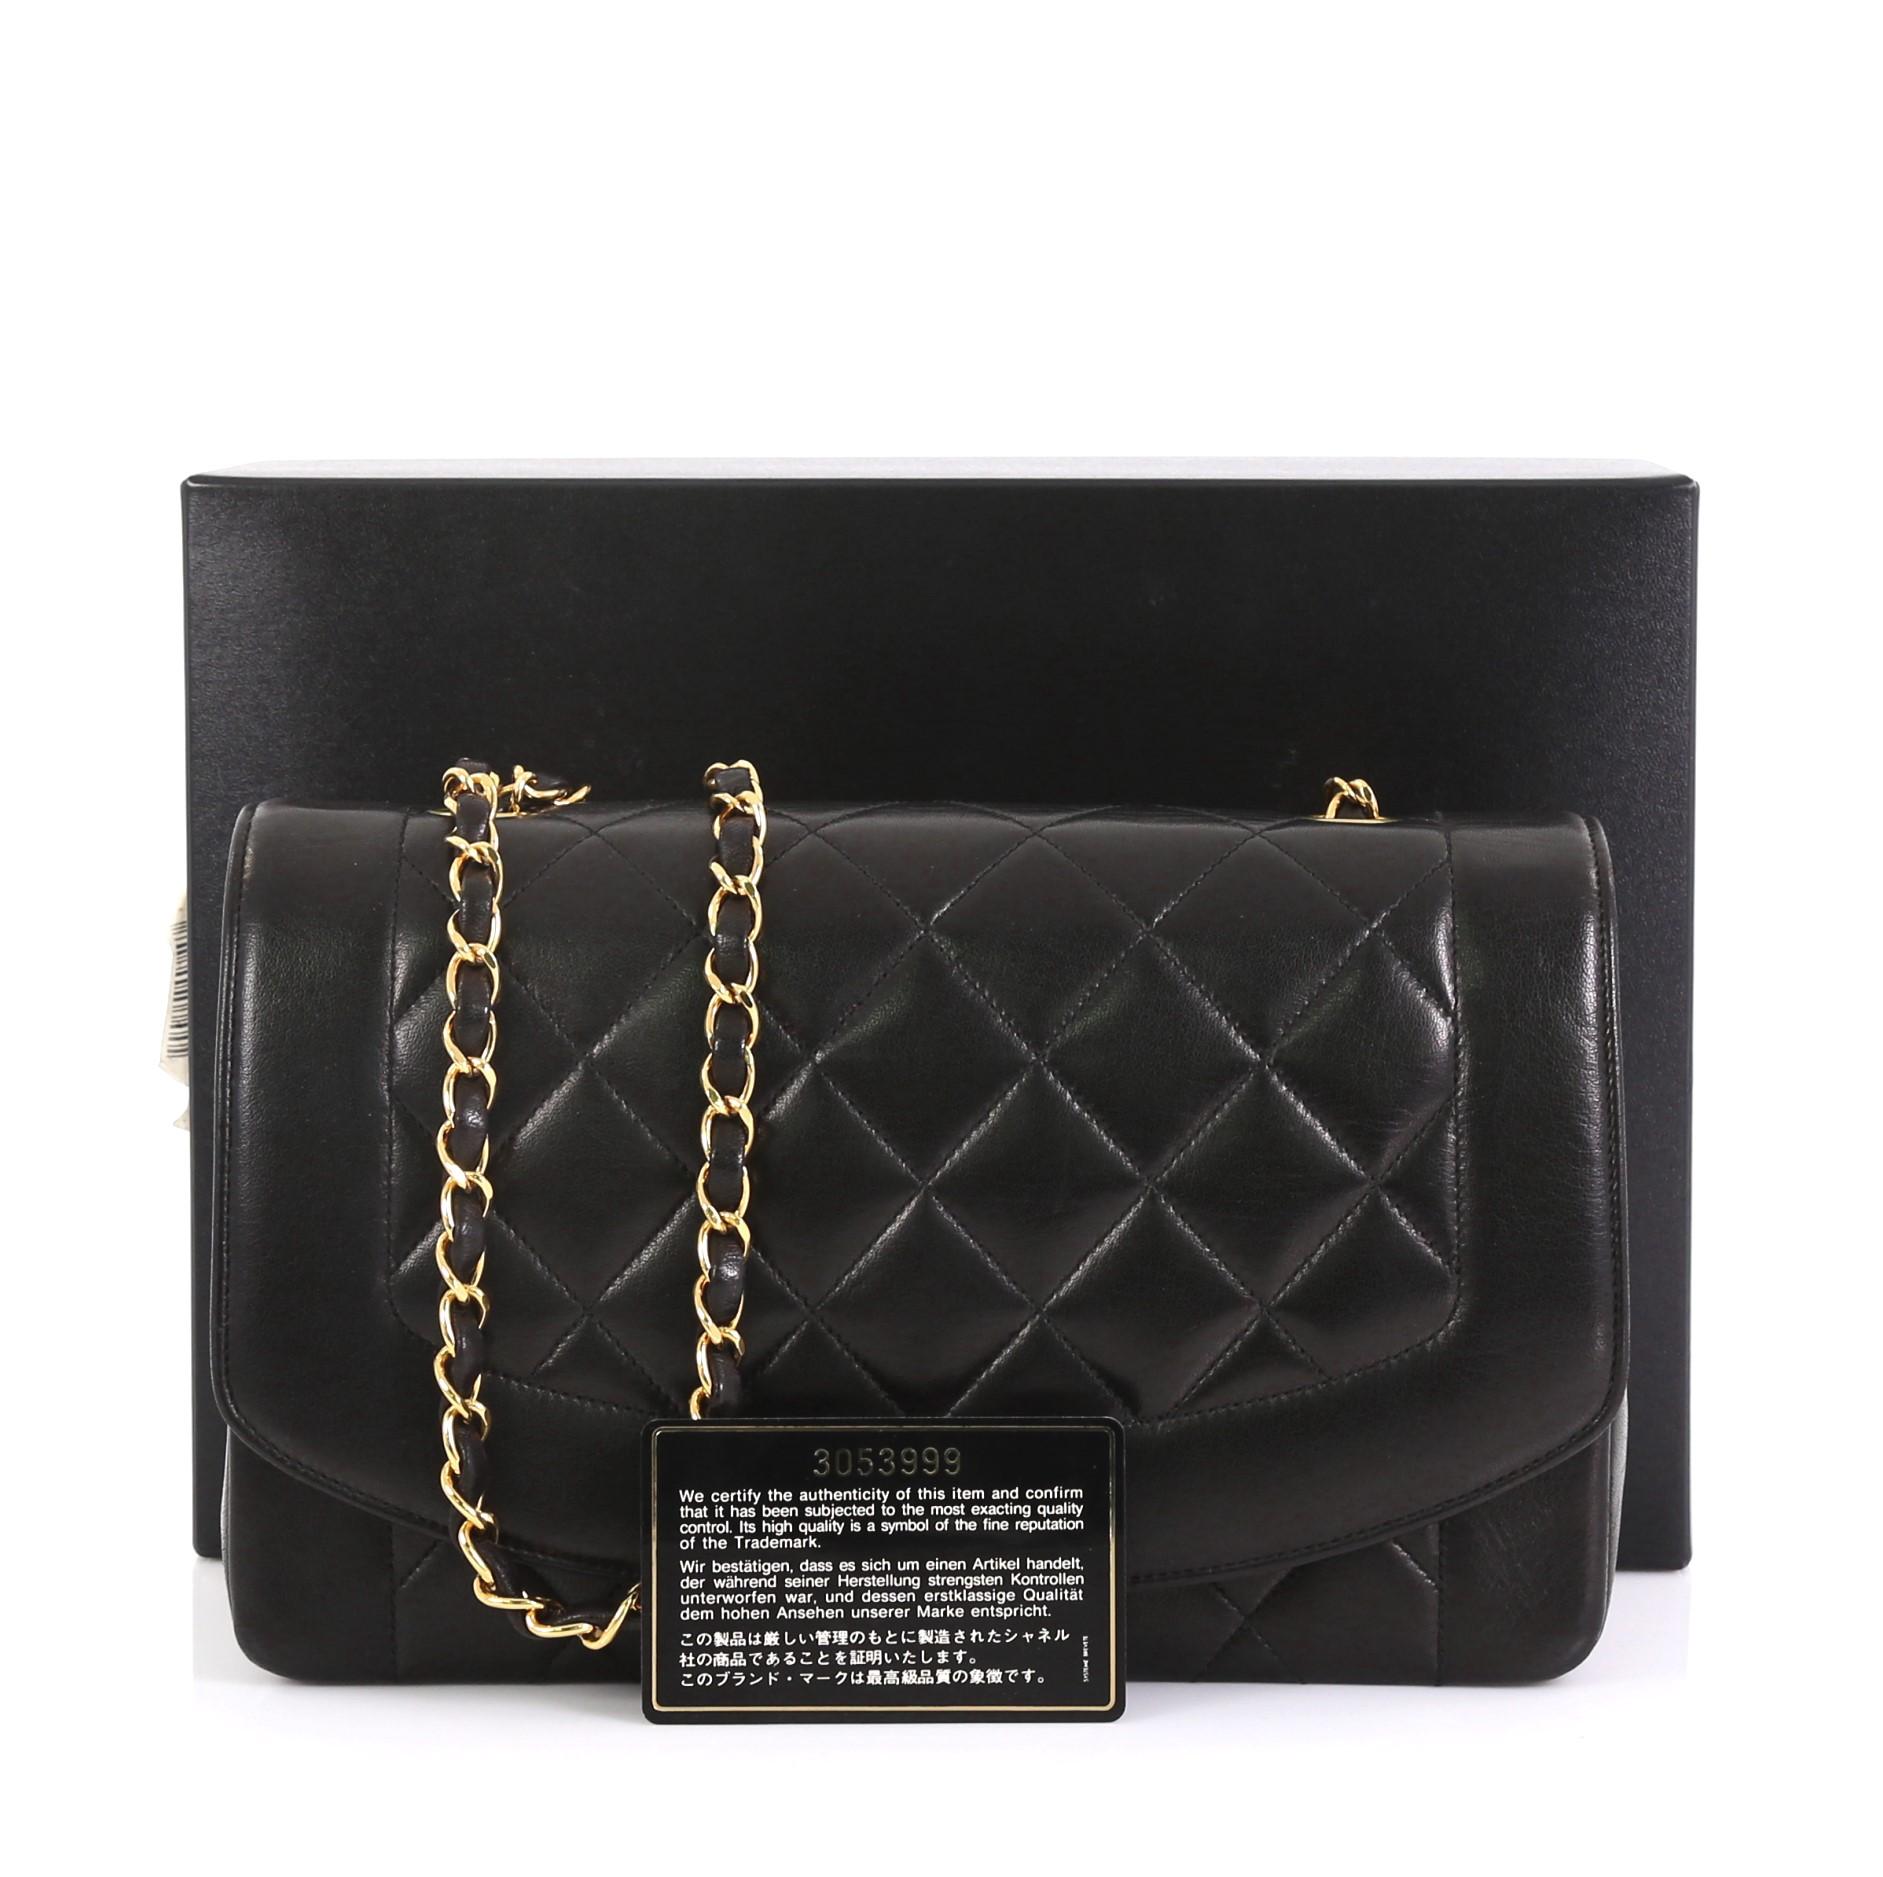 This Chanel Vintage Diana Flap Bag Quilted Lambskin Medium, crafted in black quilted lambskin leather, features woven in leather chain link strap and gold-tone hardware. Its CC turn-lock closure opens to a red leather interior with zip pocket.